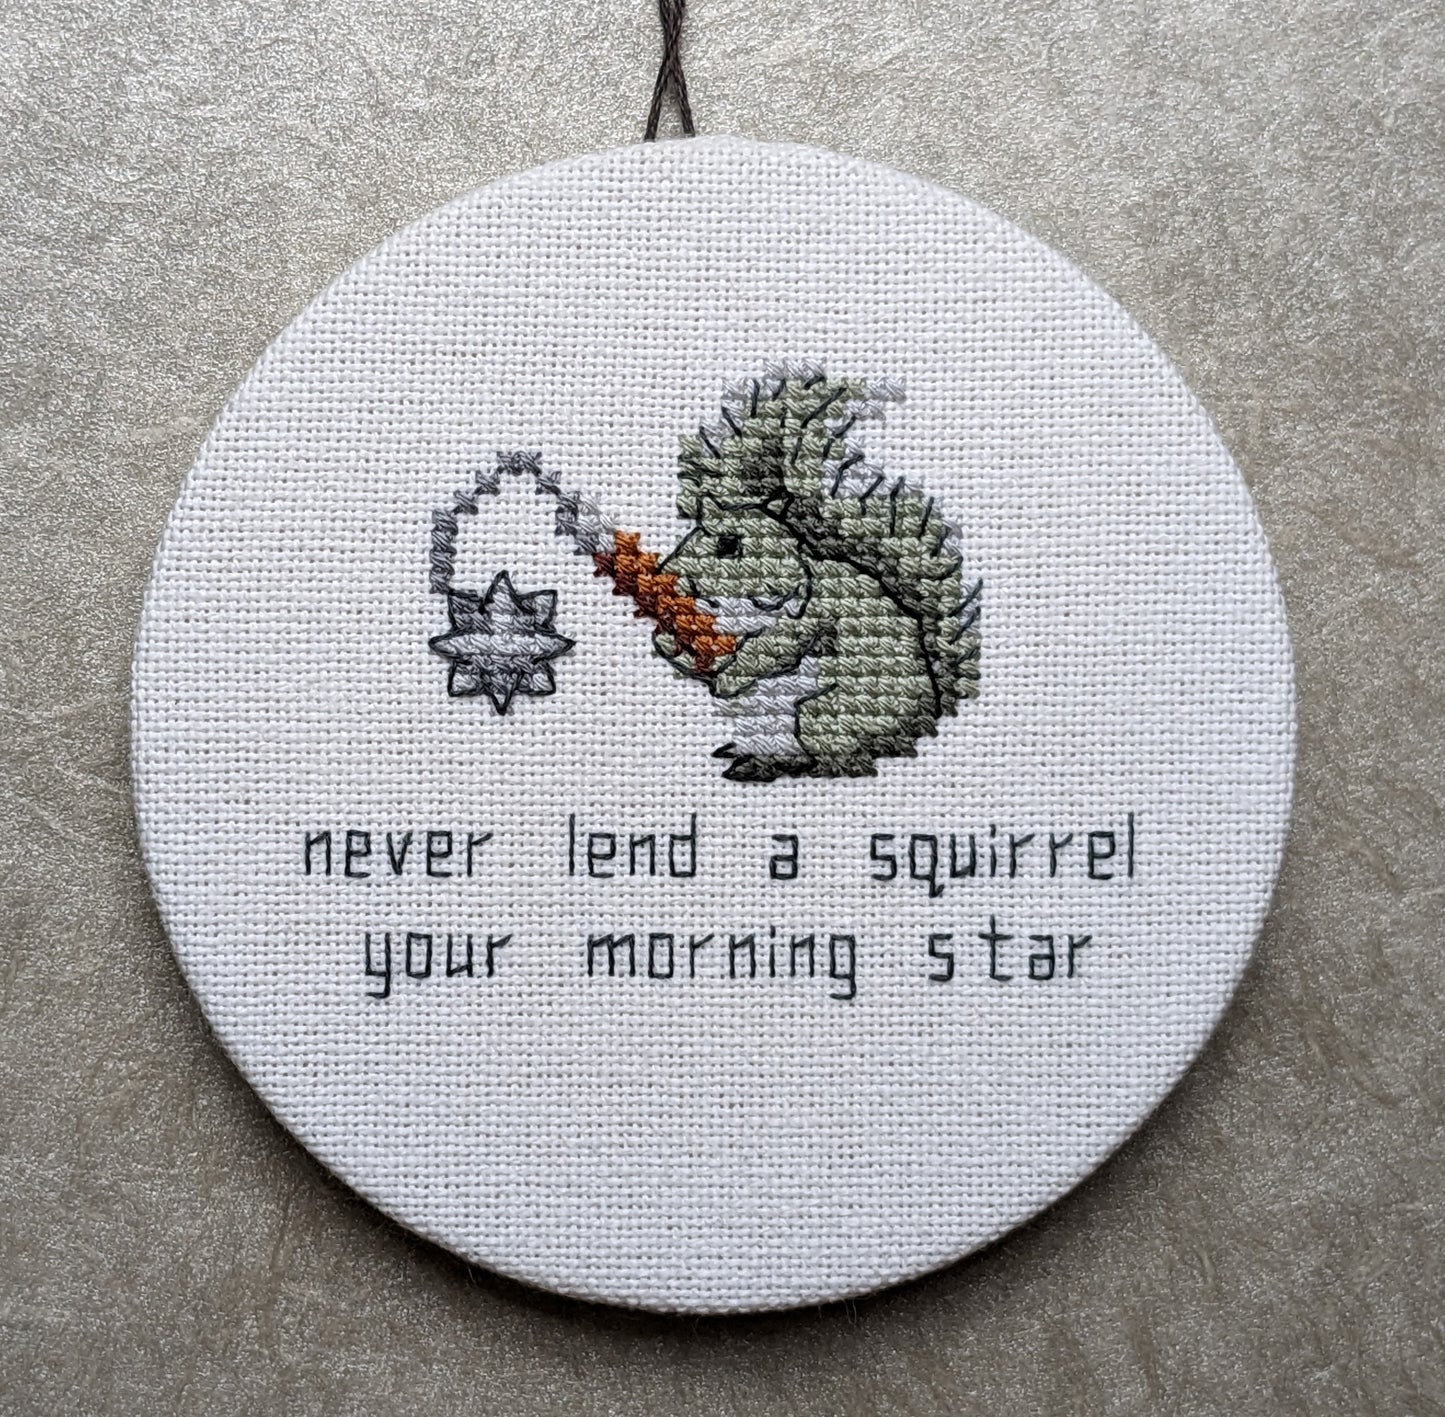 Safety Third: Never Lend a Squirrel Your Morning Star cross stitch pattern  - instant PDF download